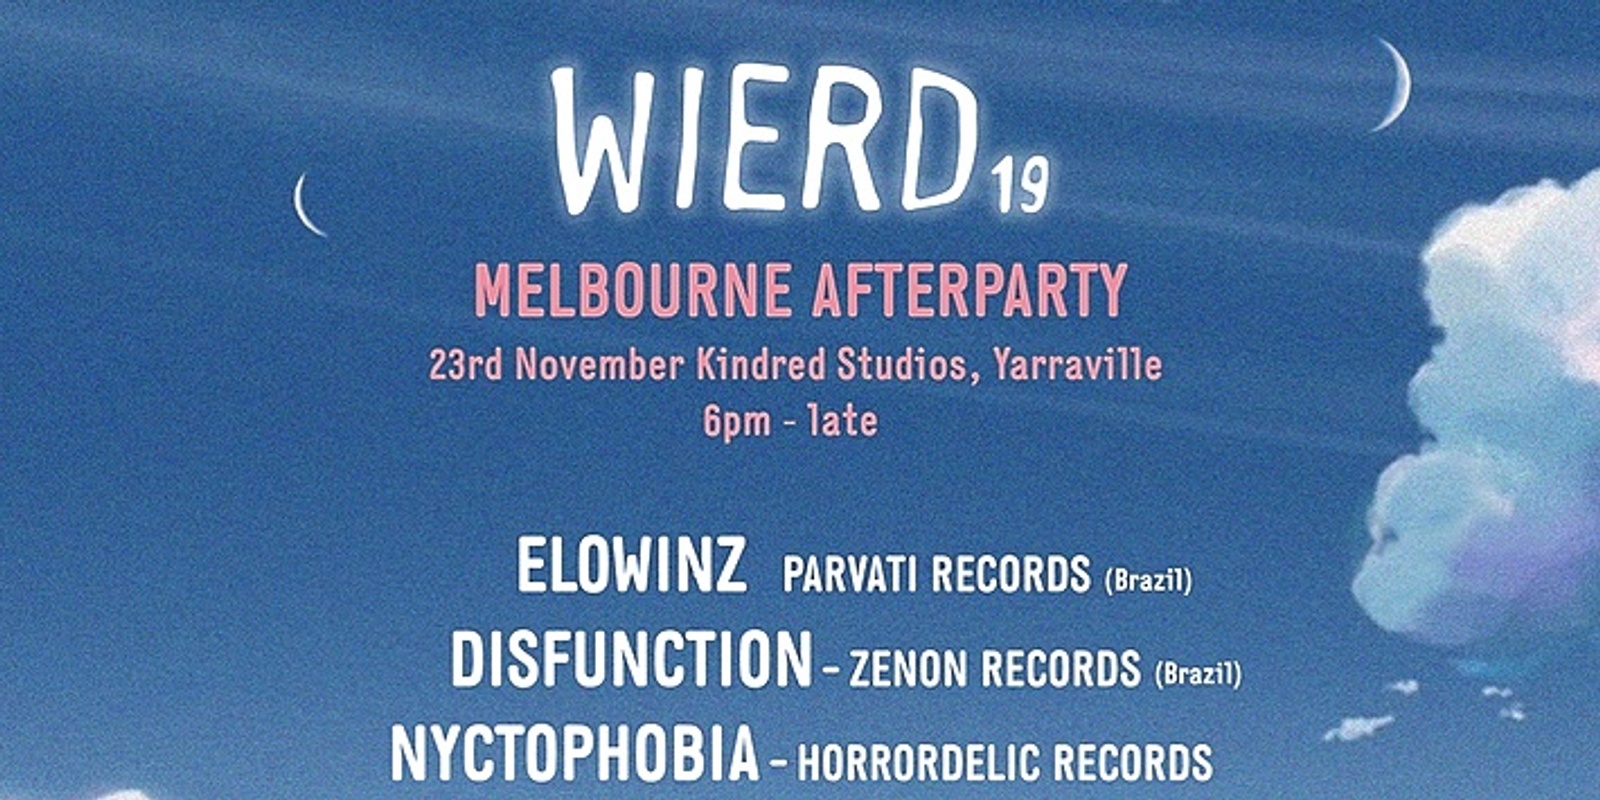 Banner image for Wierd19 Afterparty Melbourne